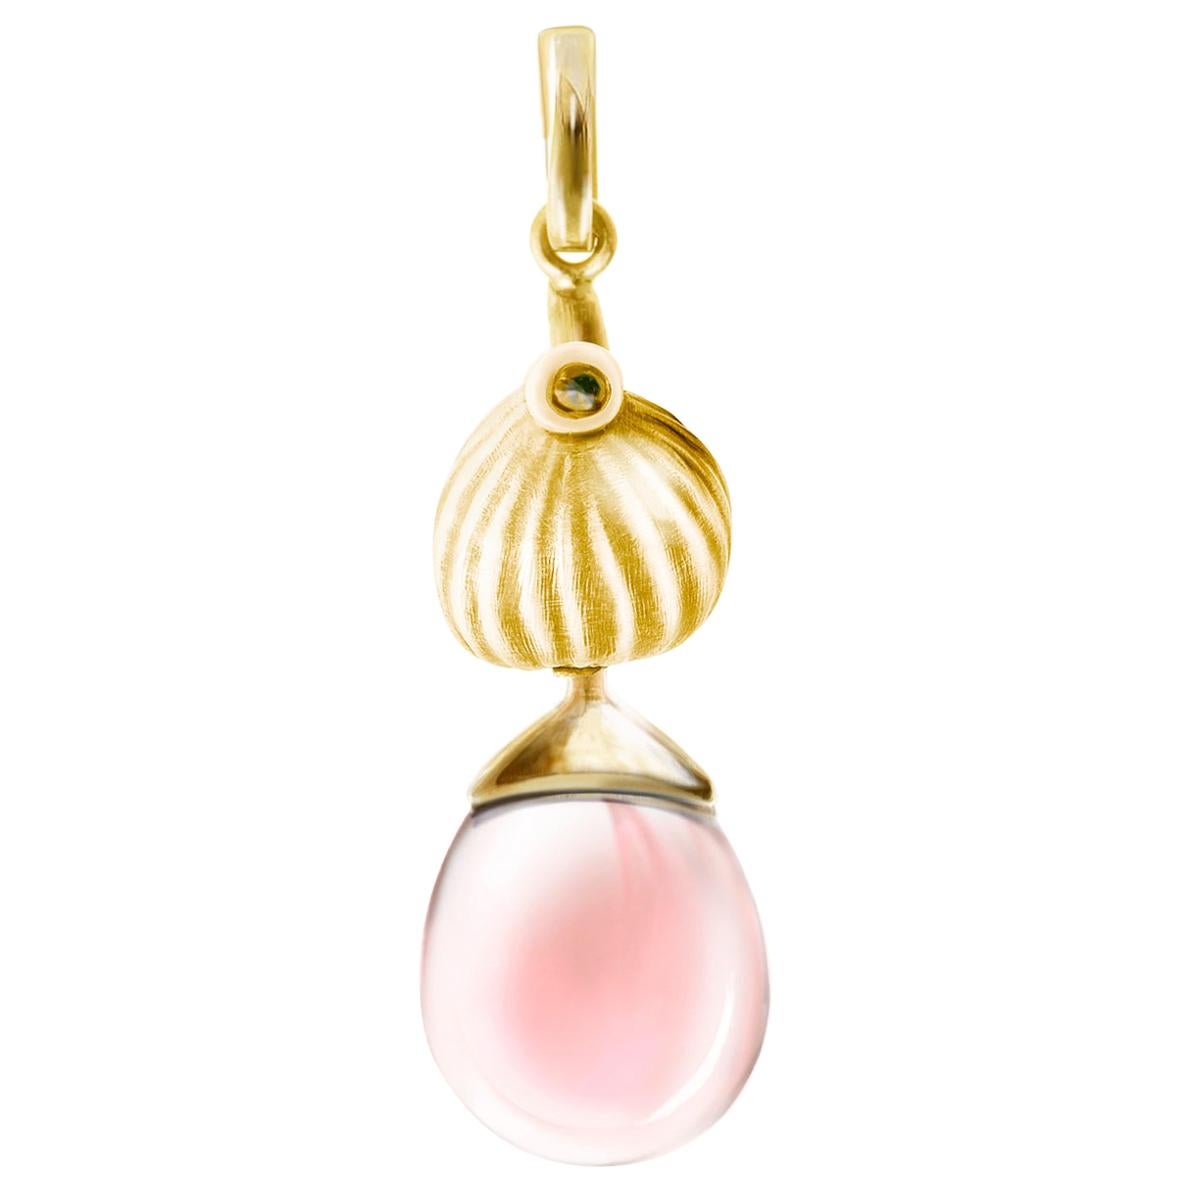 Yellow Gold Drop Pendant Necklace with Rose Quartz by the Artist